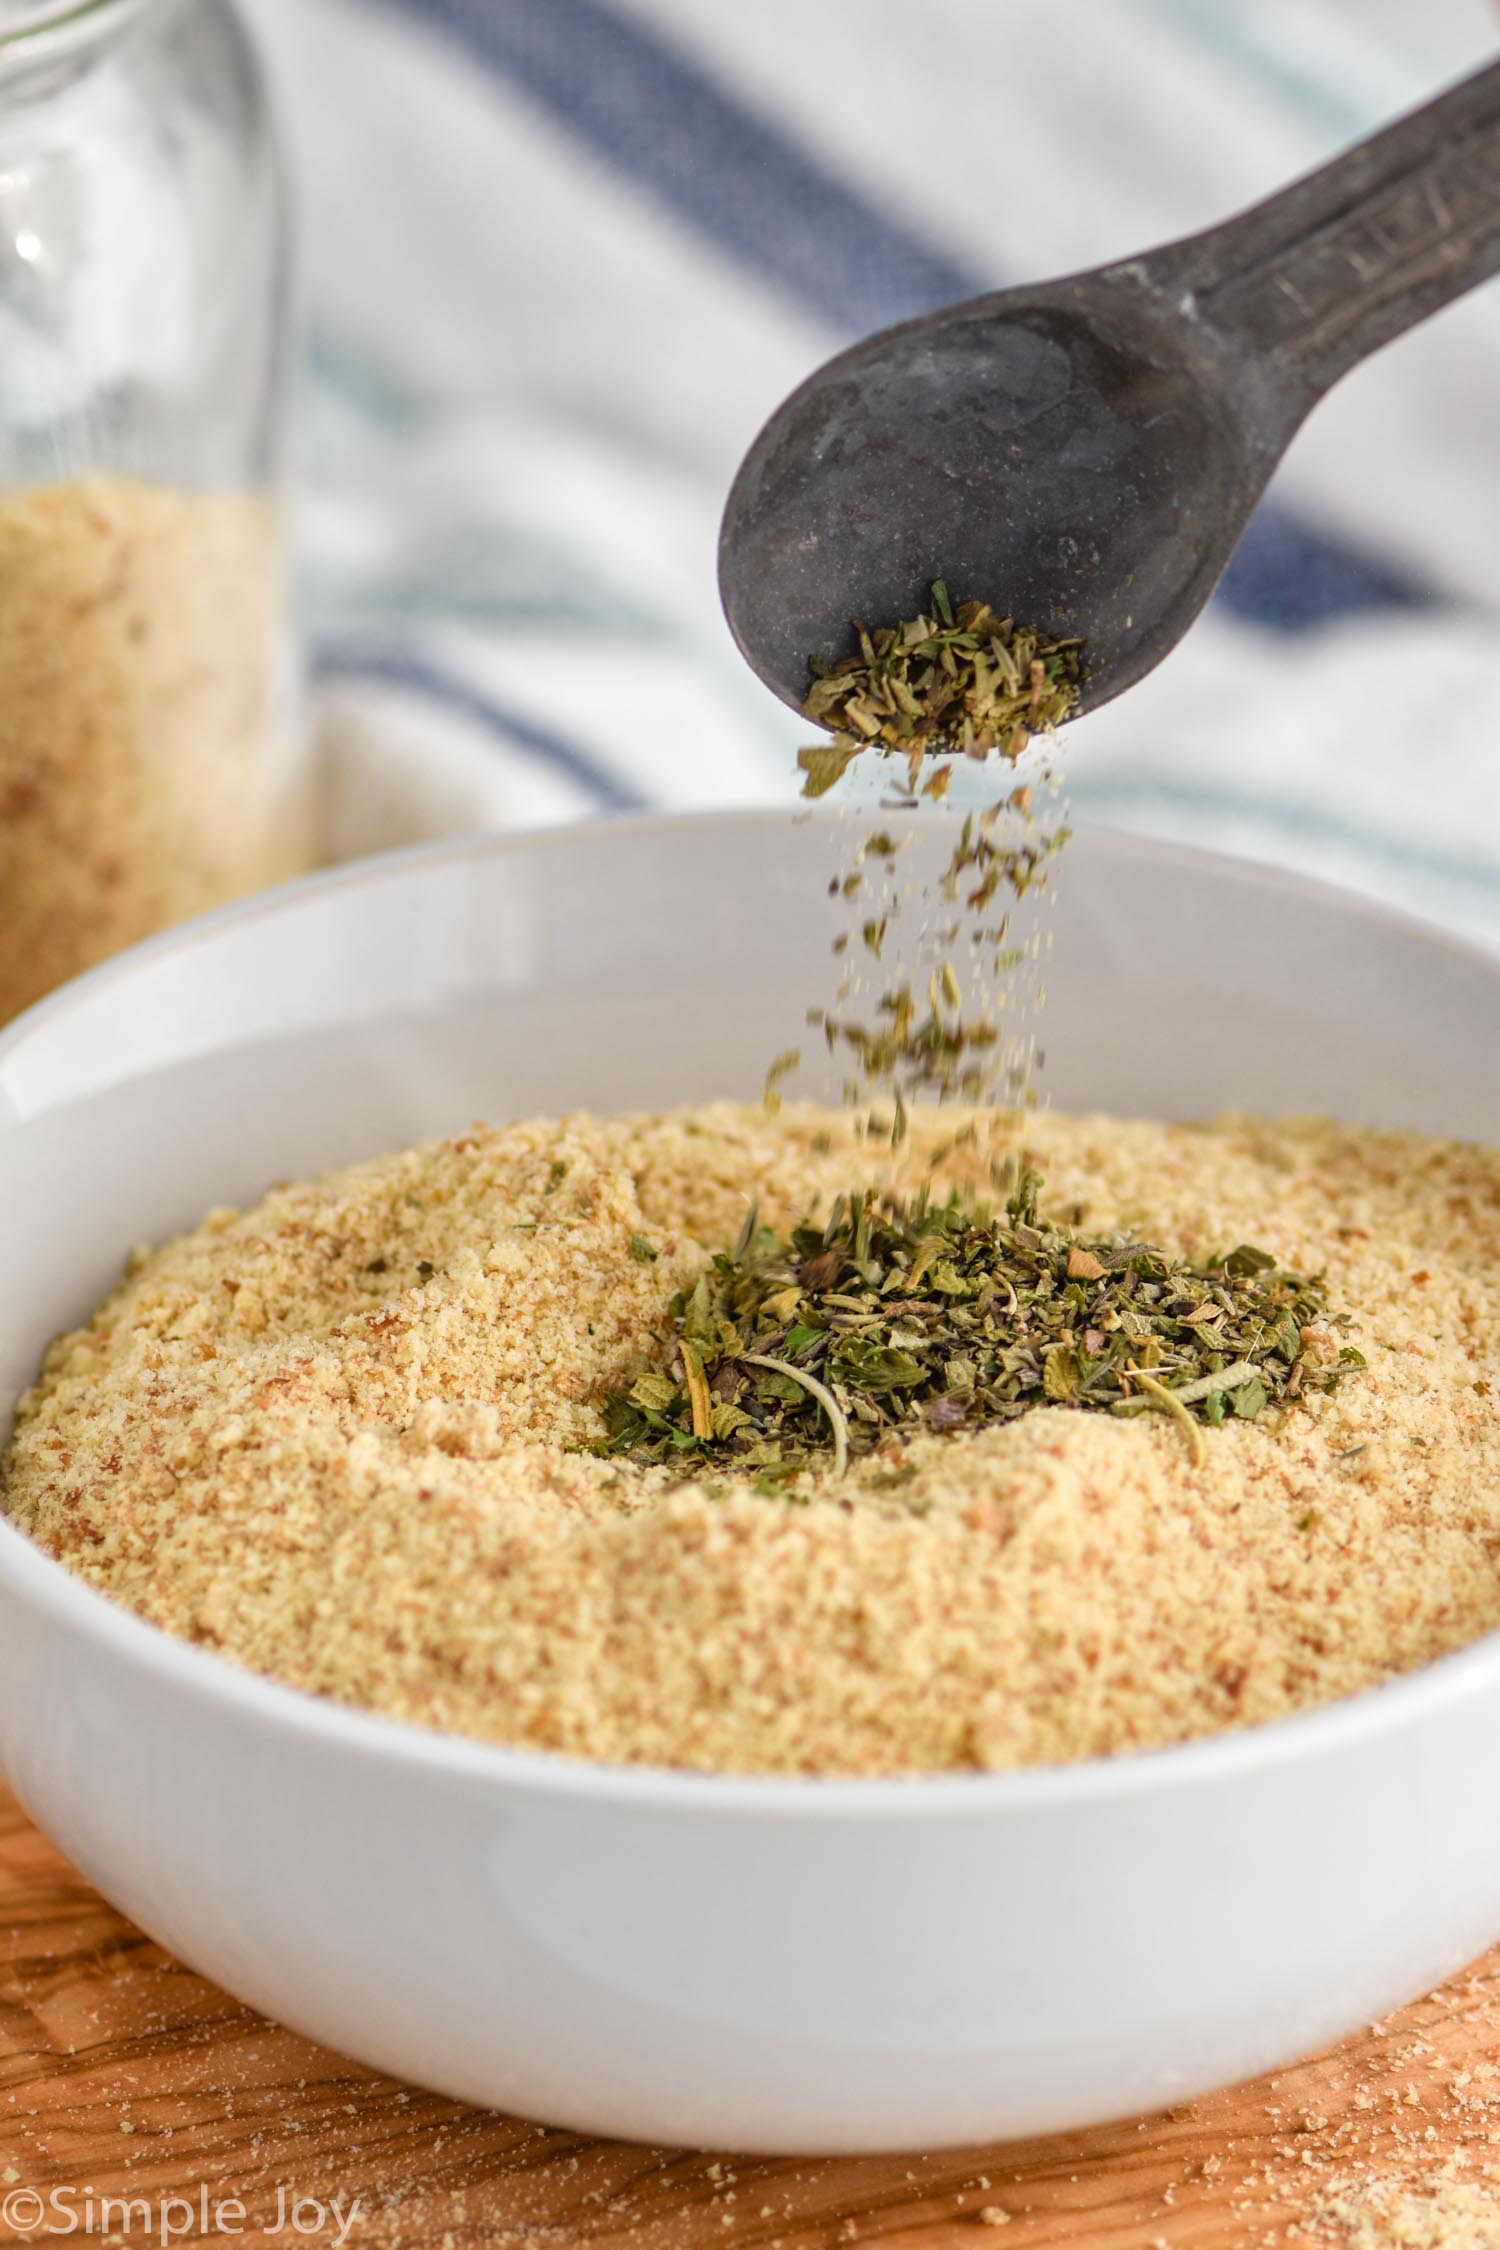 Photo of a bowl of Breadcrumbs with a measuring spoon dumping seasoning into bowl of Breadcrumbs.